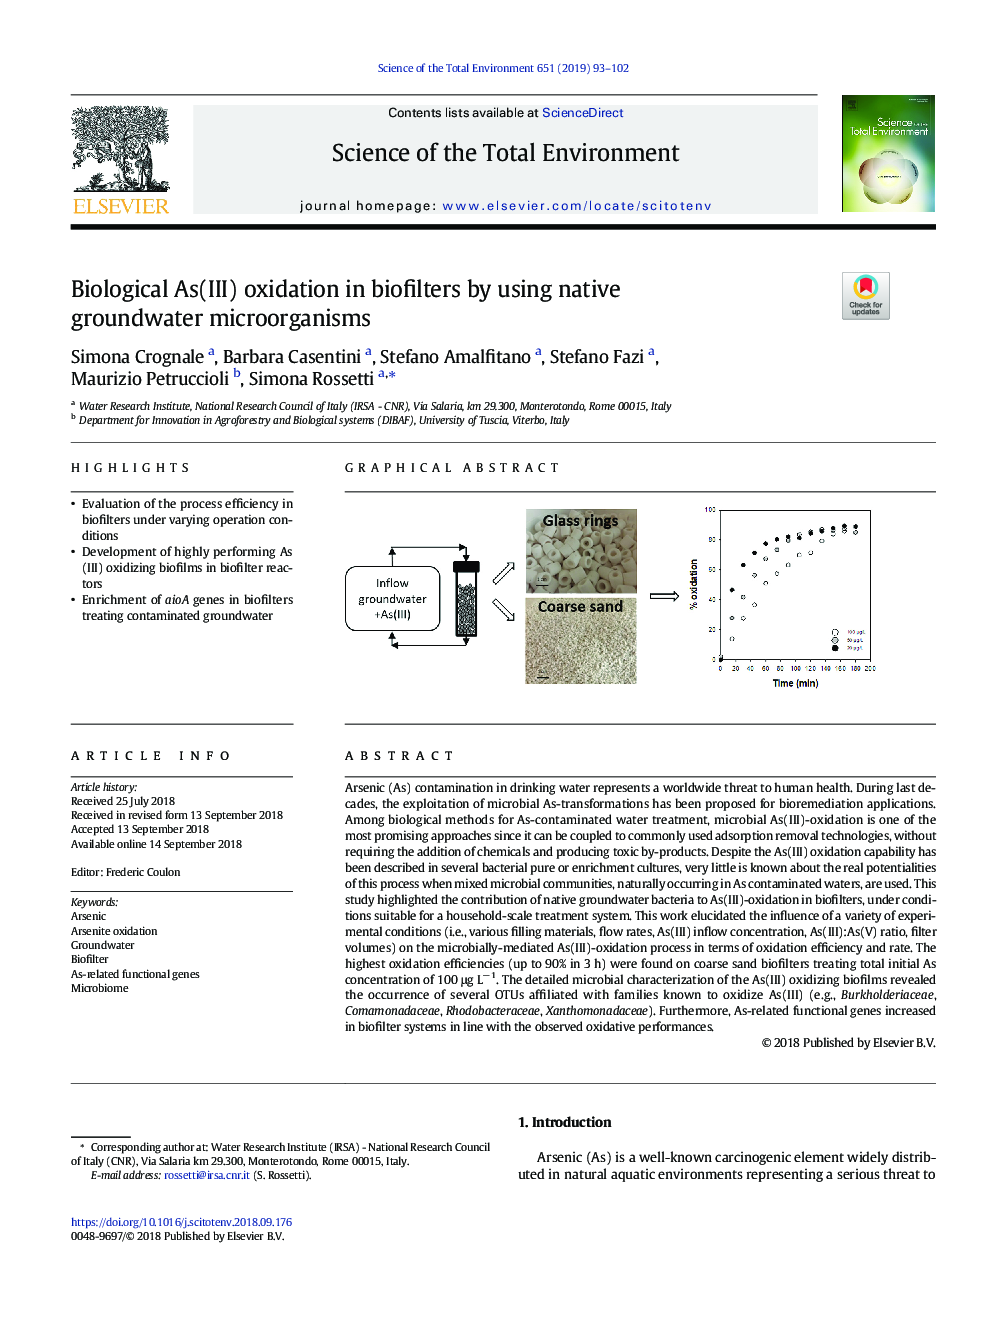 Biological As(III) oxidation in biofilters by using native groundwater microorganisms